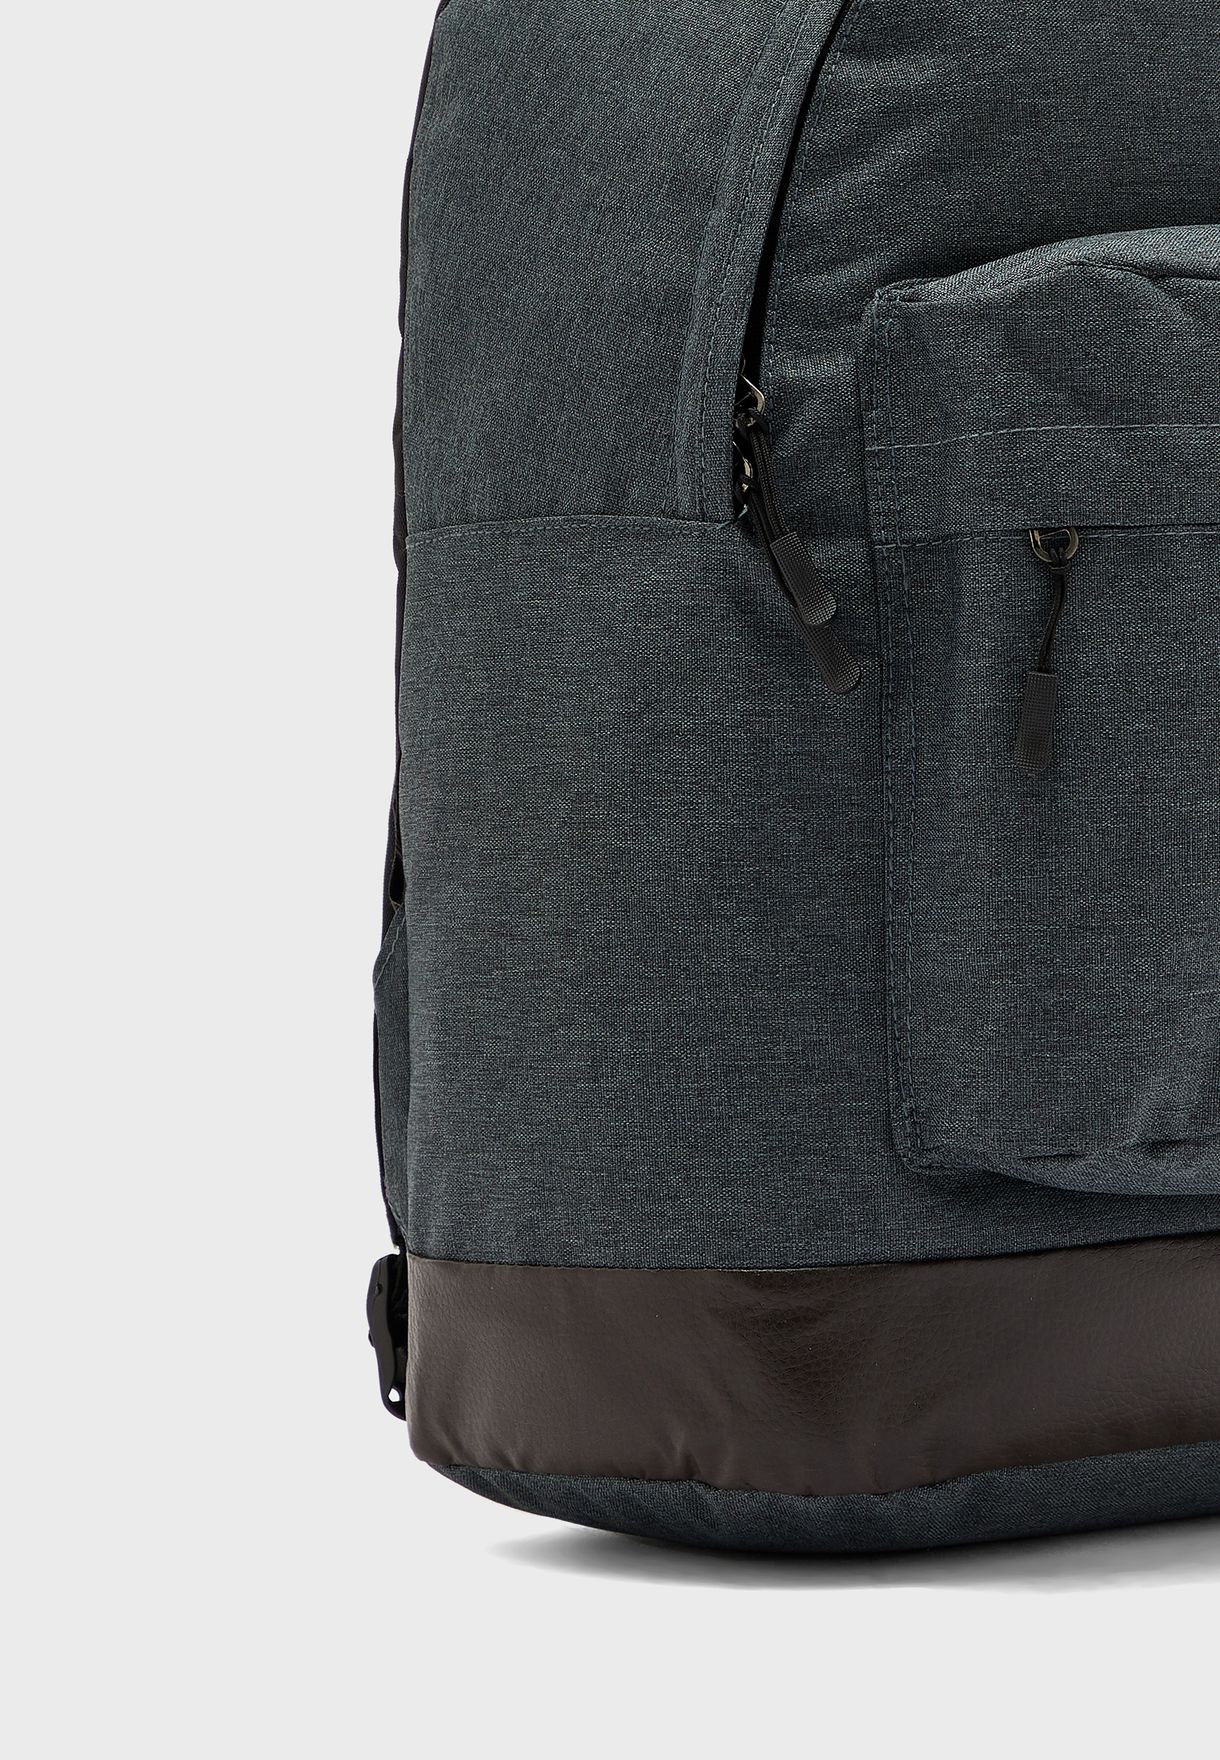 Men's Classic Backpack With Laptop Sleeve